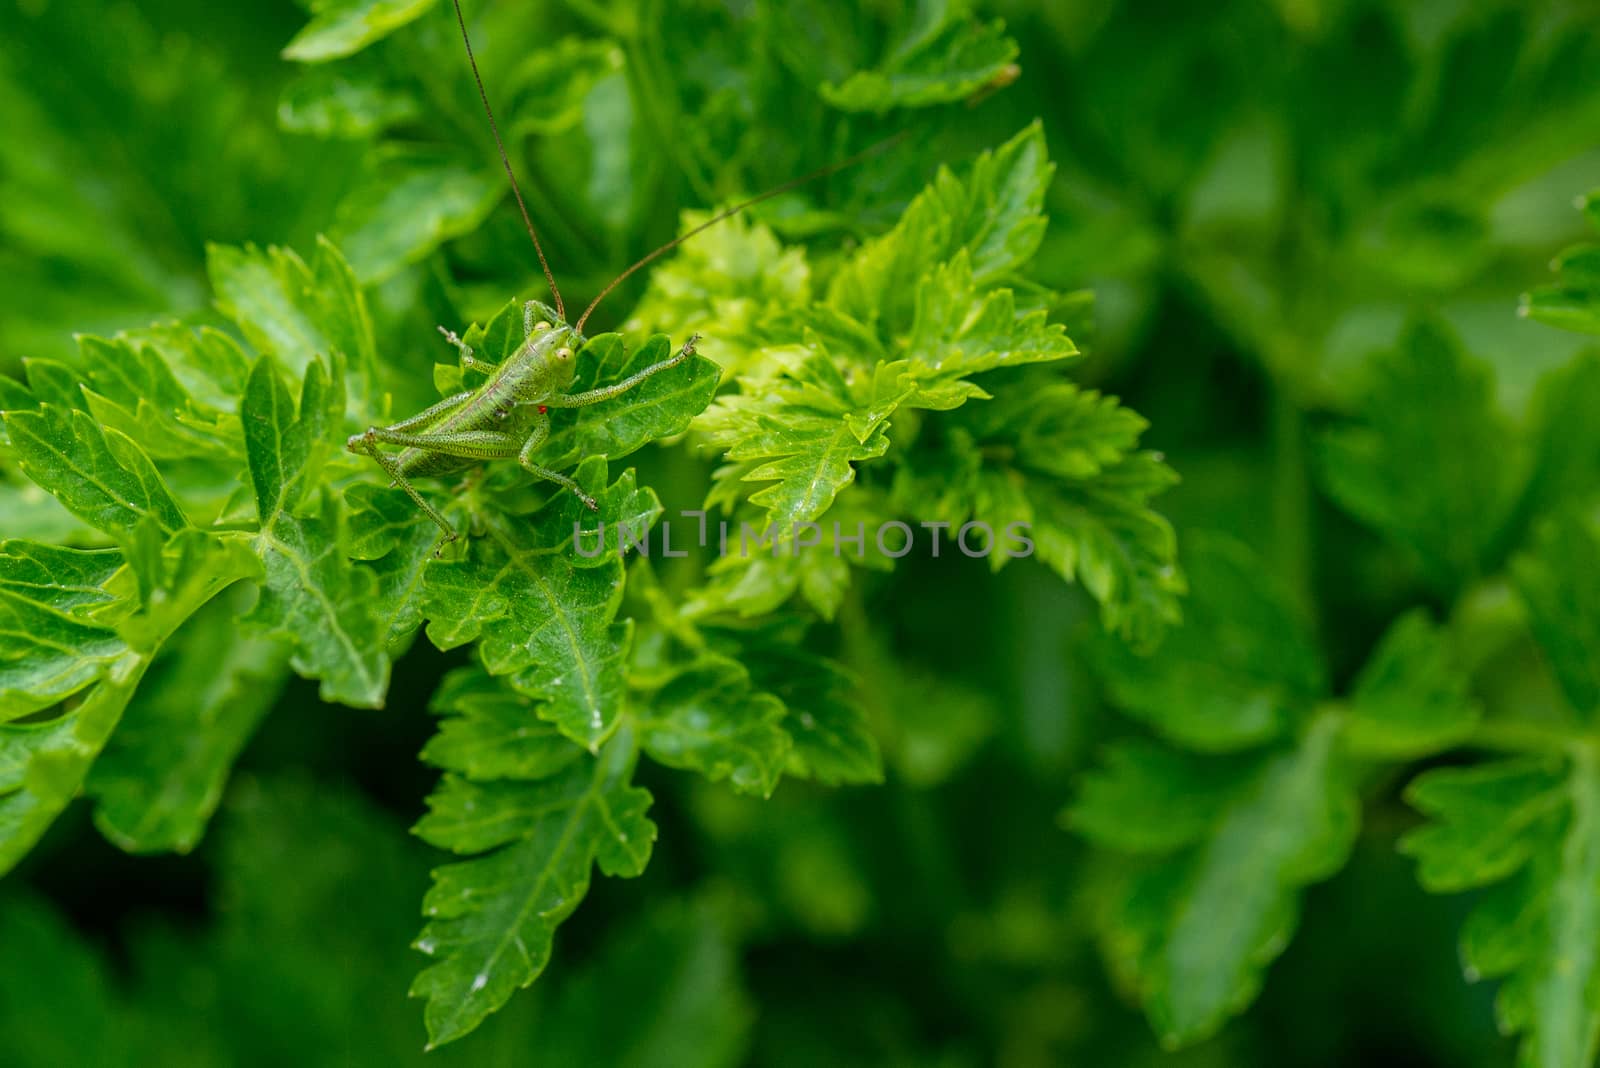 green cricket camouflaged on parsley